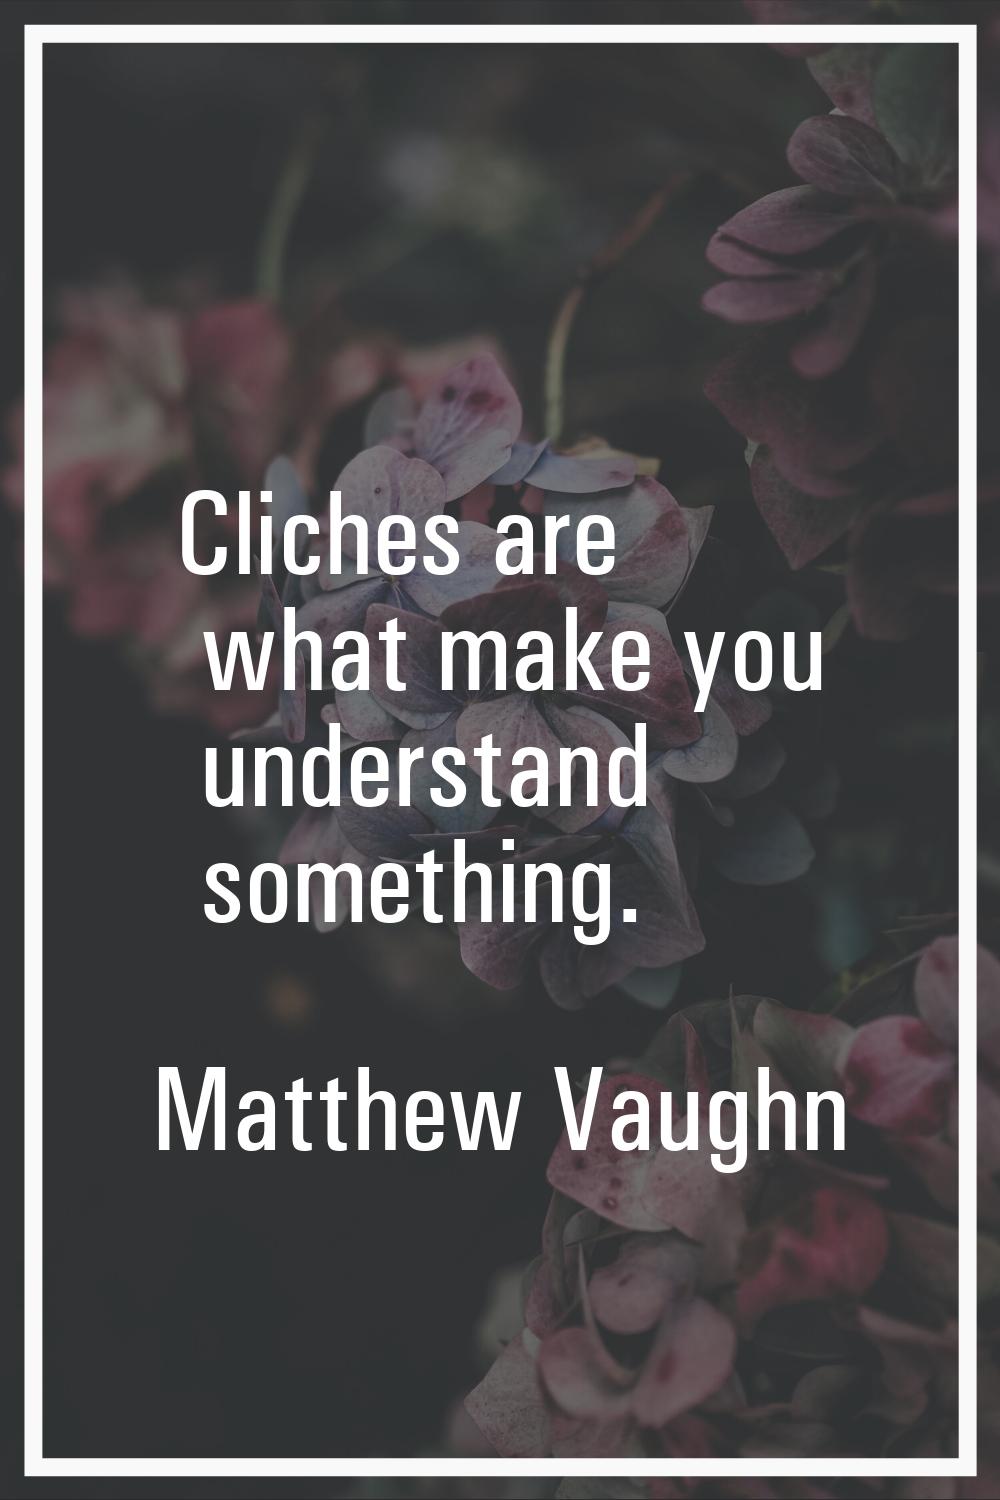 Cliches are what make you understand something.